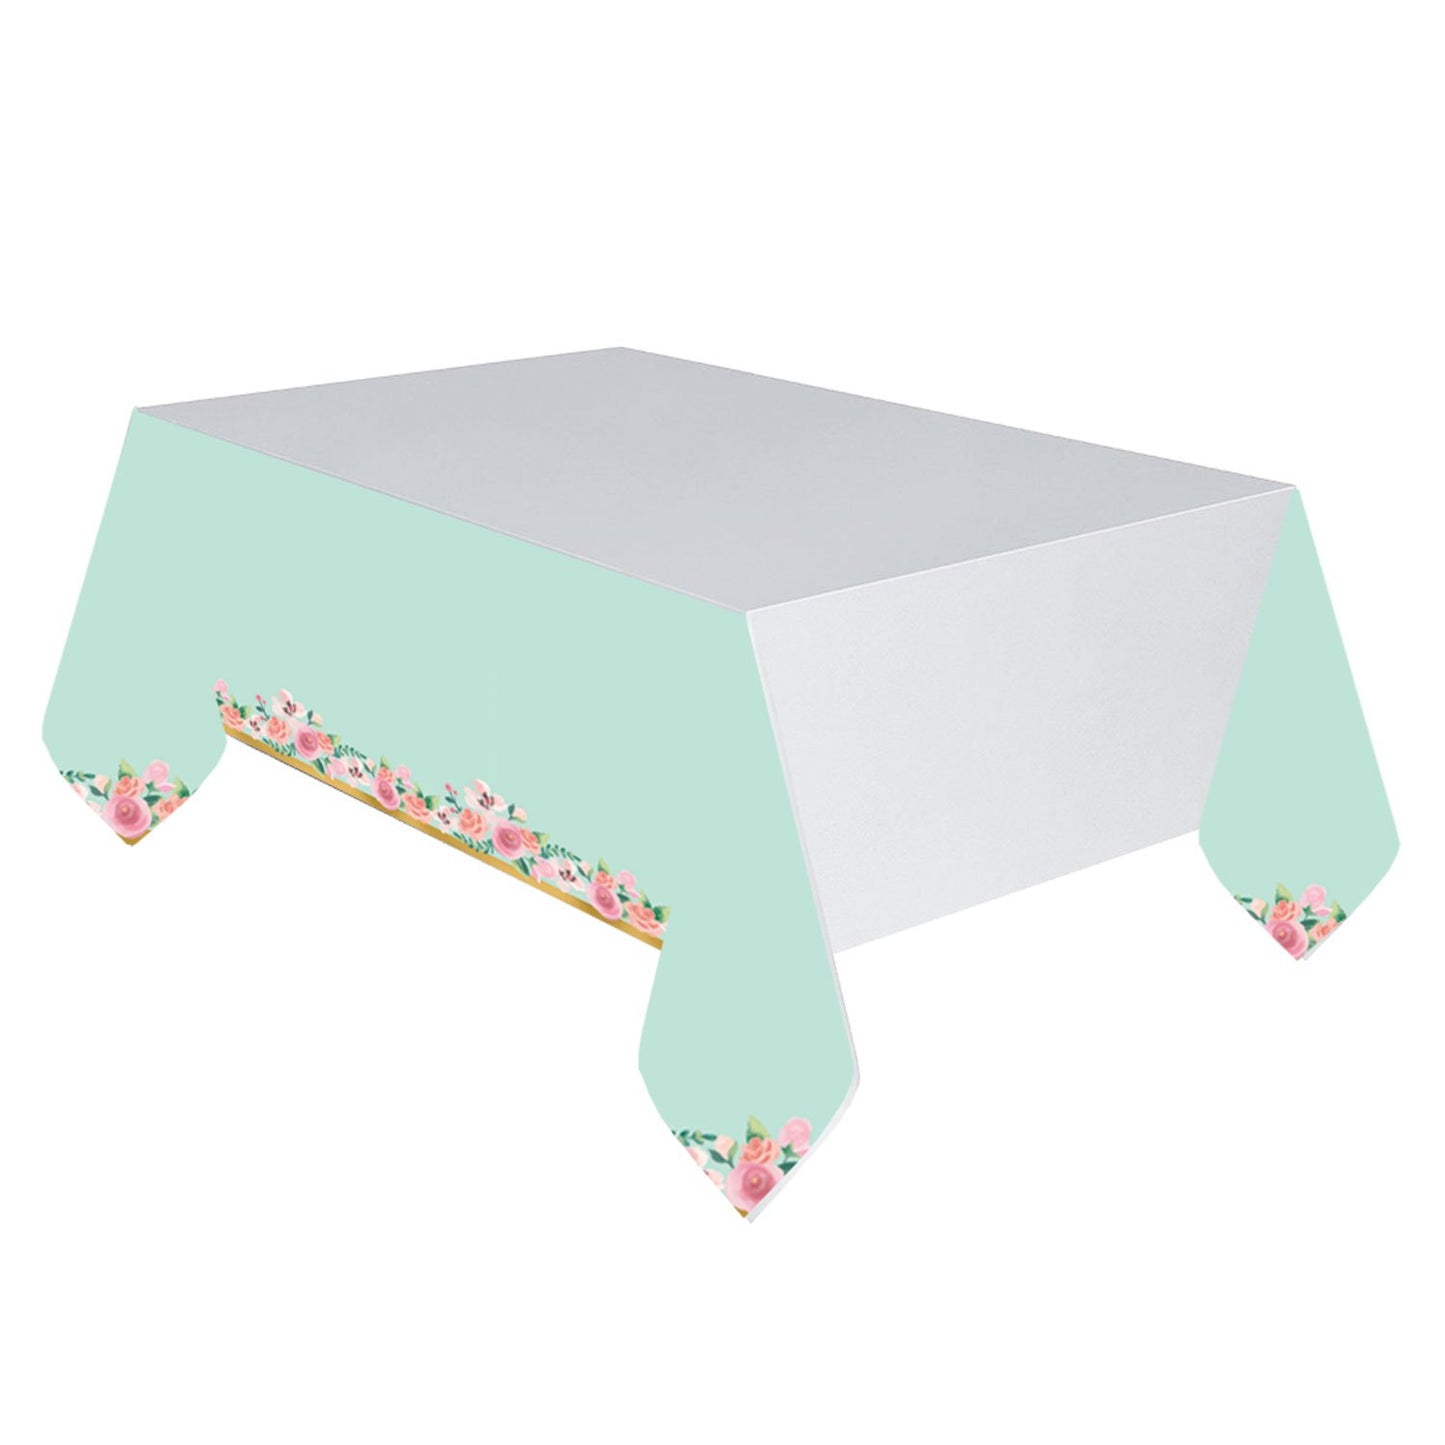 Mint to Be Paper Tablecover - 1.8m x 1.2m